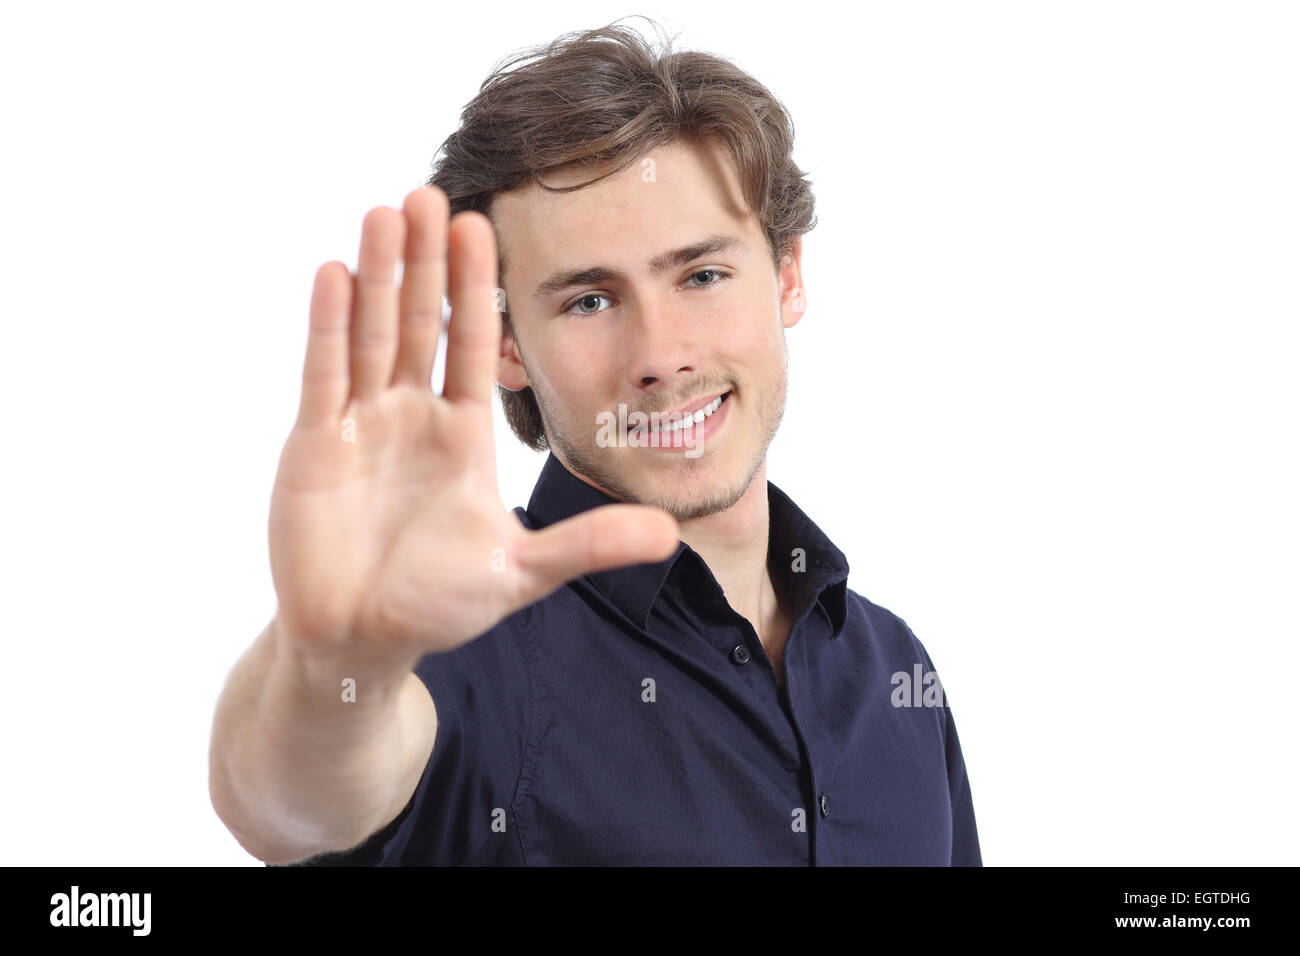 Handsome man gesturing stop or framing isolated on a white background Stock Photo